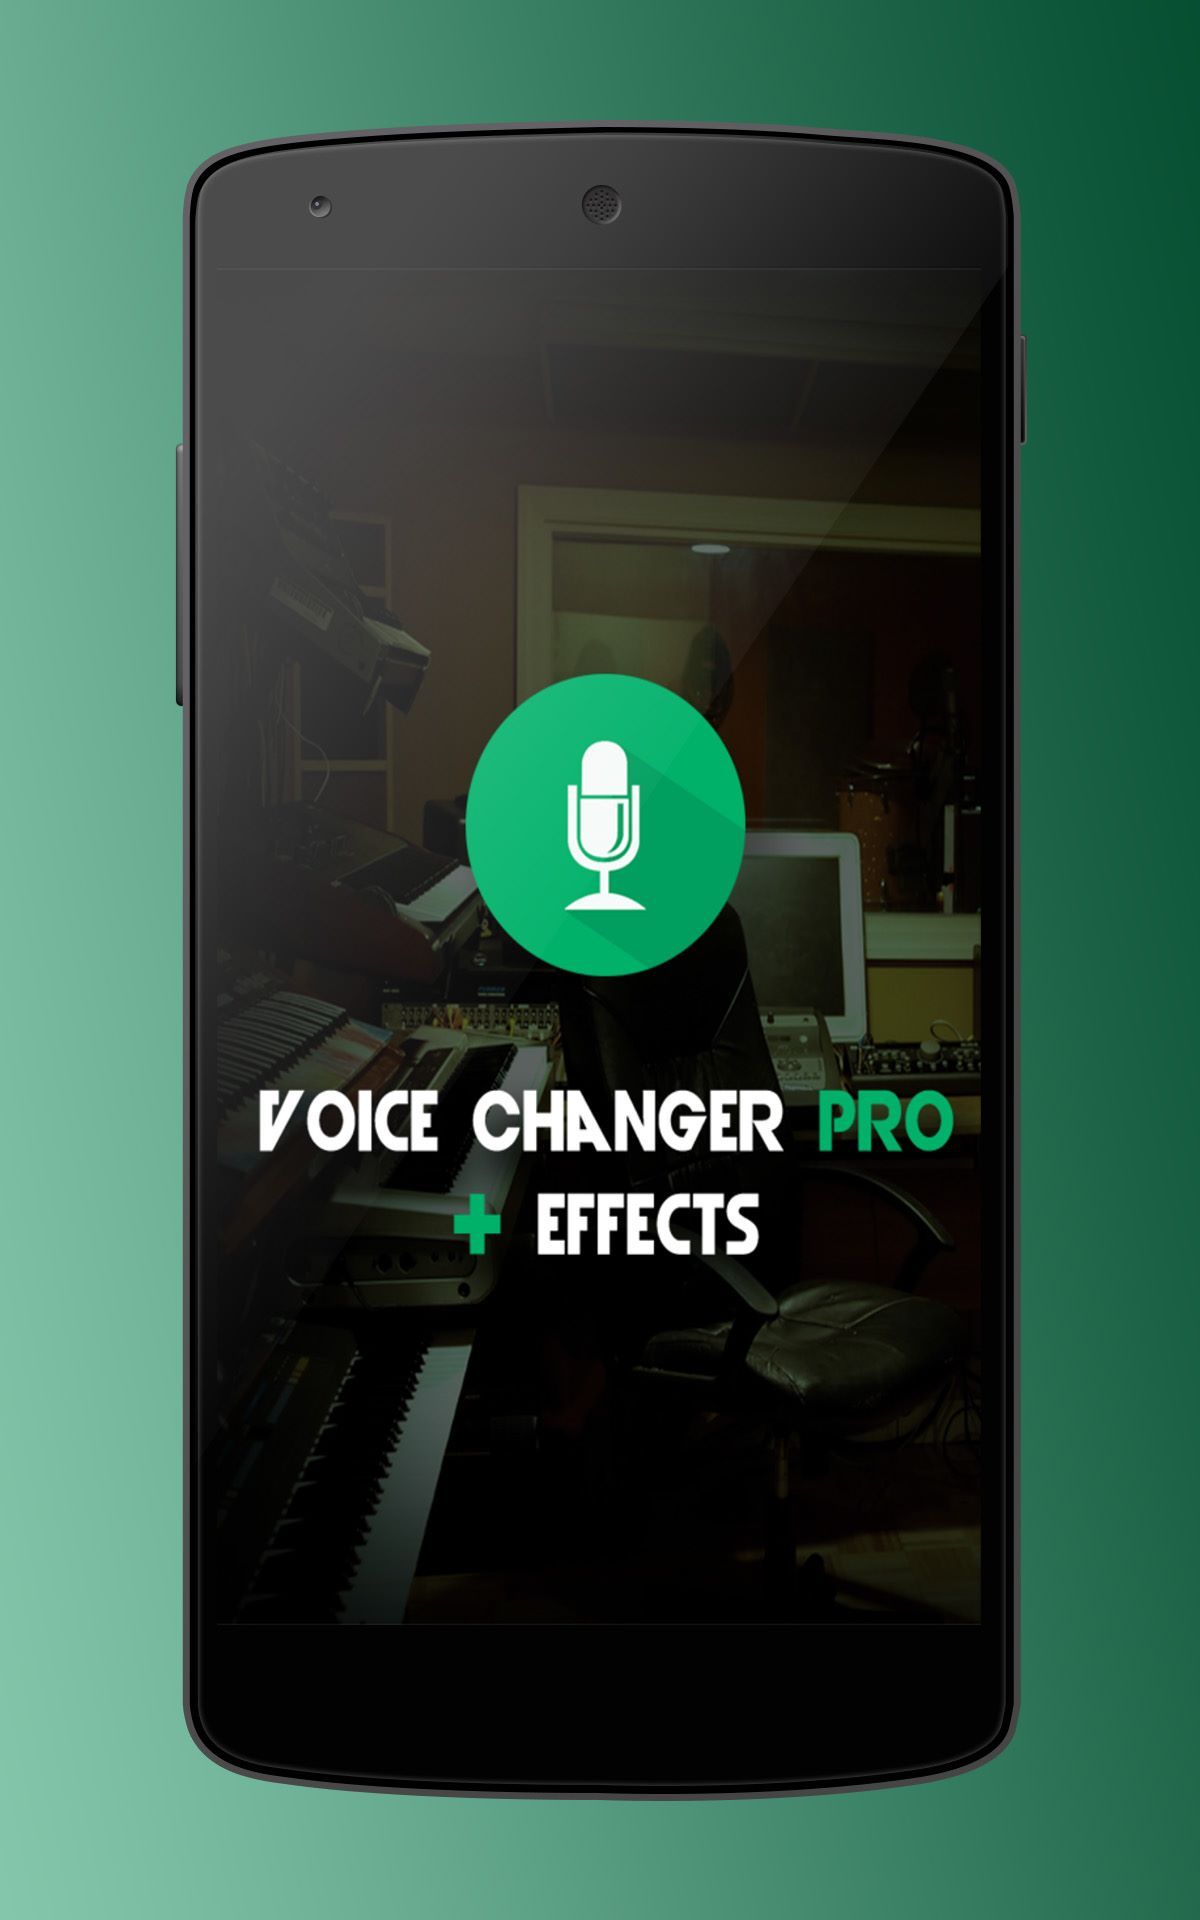 Voice Changer Pro + Effects